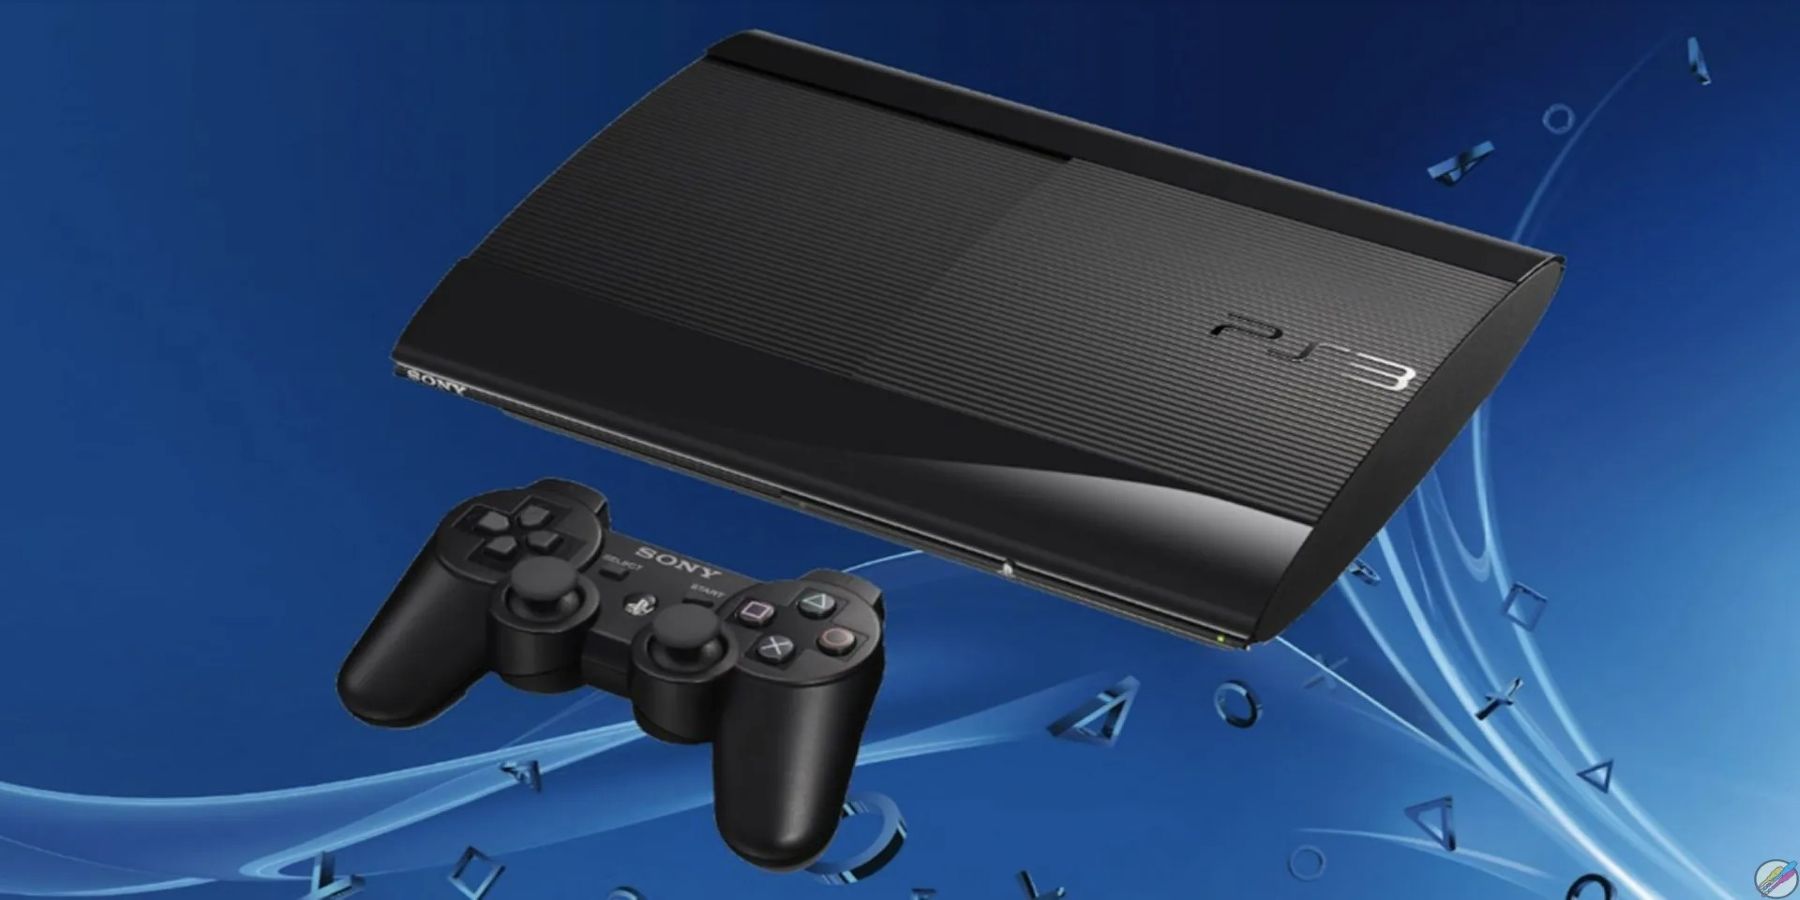 PS3 Firmware 4.90 is out! (and you really don't want to update) 